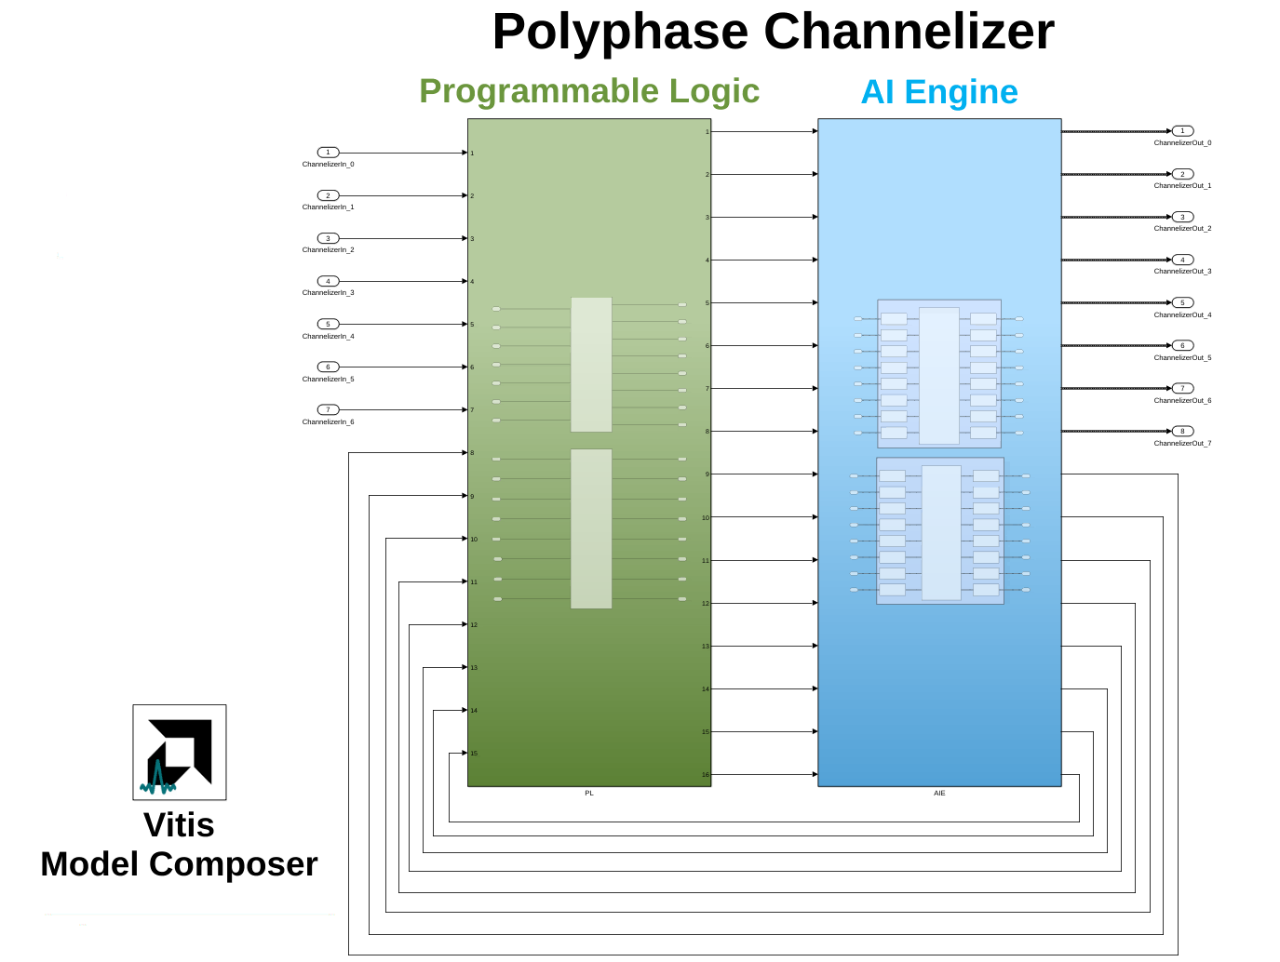 Polyphase Channelizer